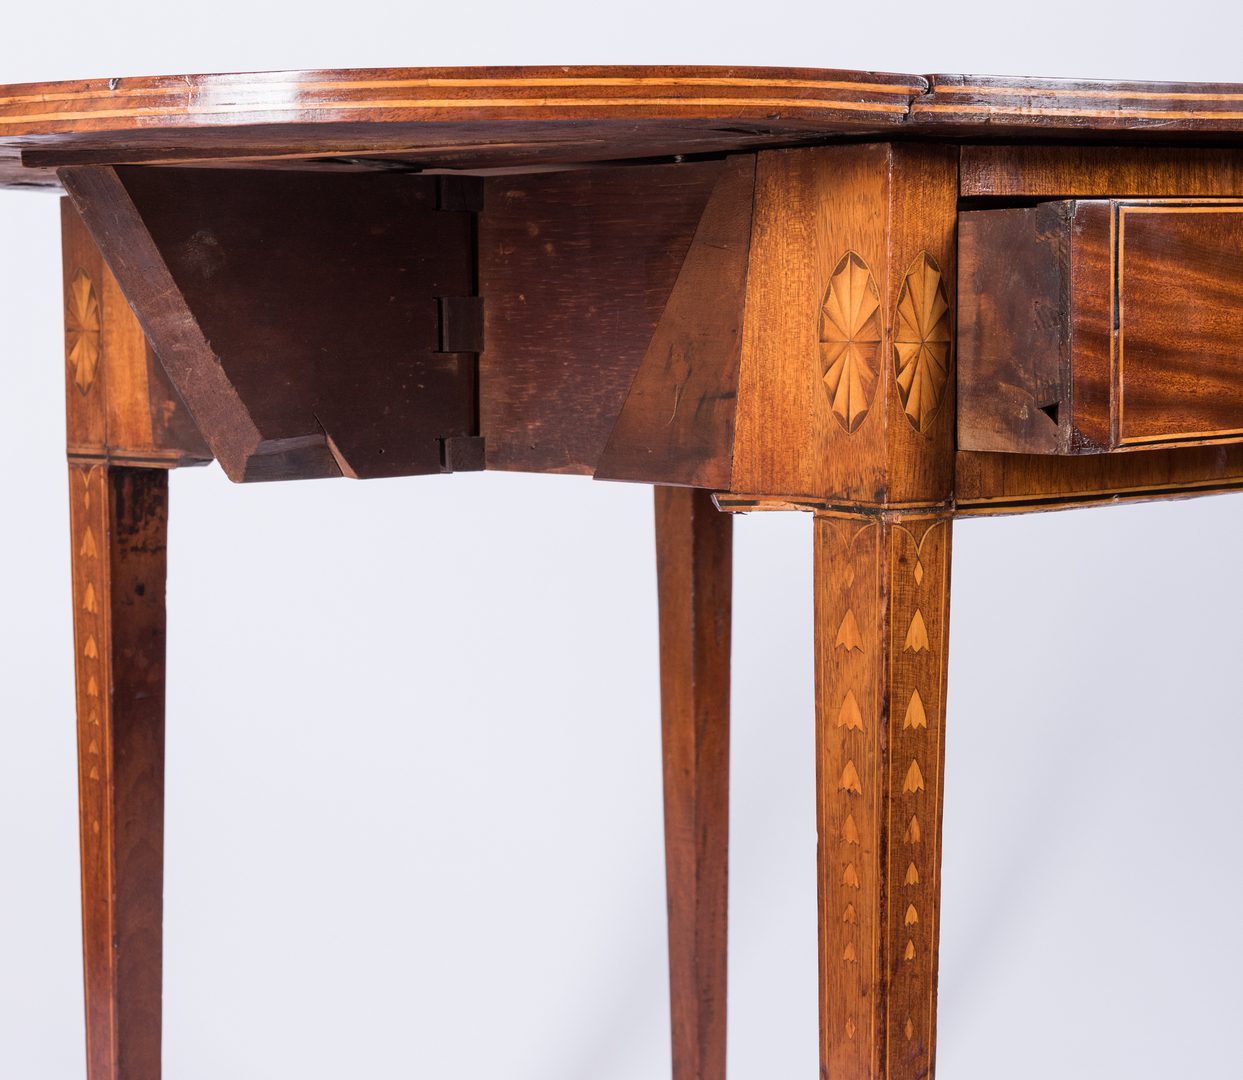 Lot 115: Federal Inlaid Table, poss. Baltimore